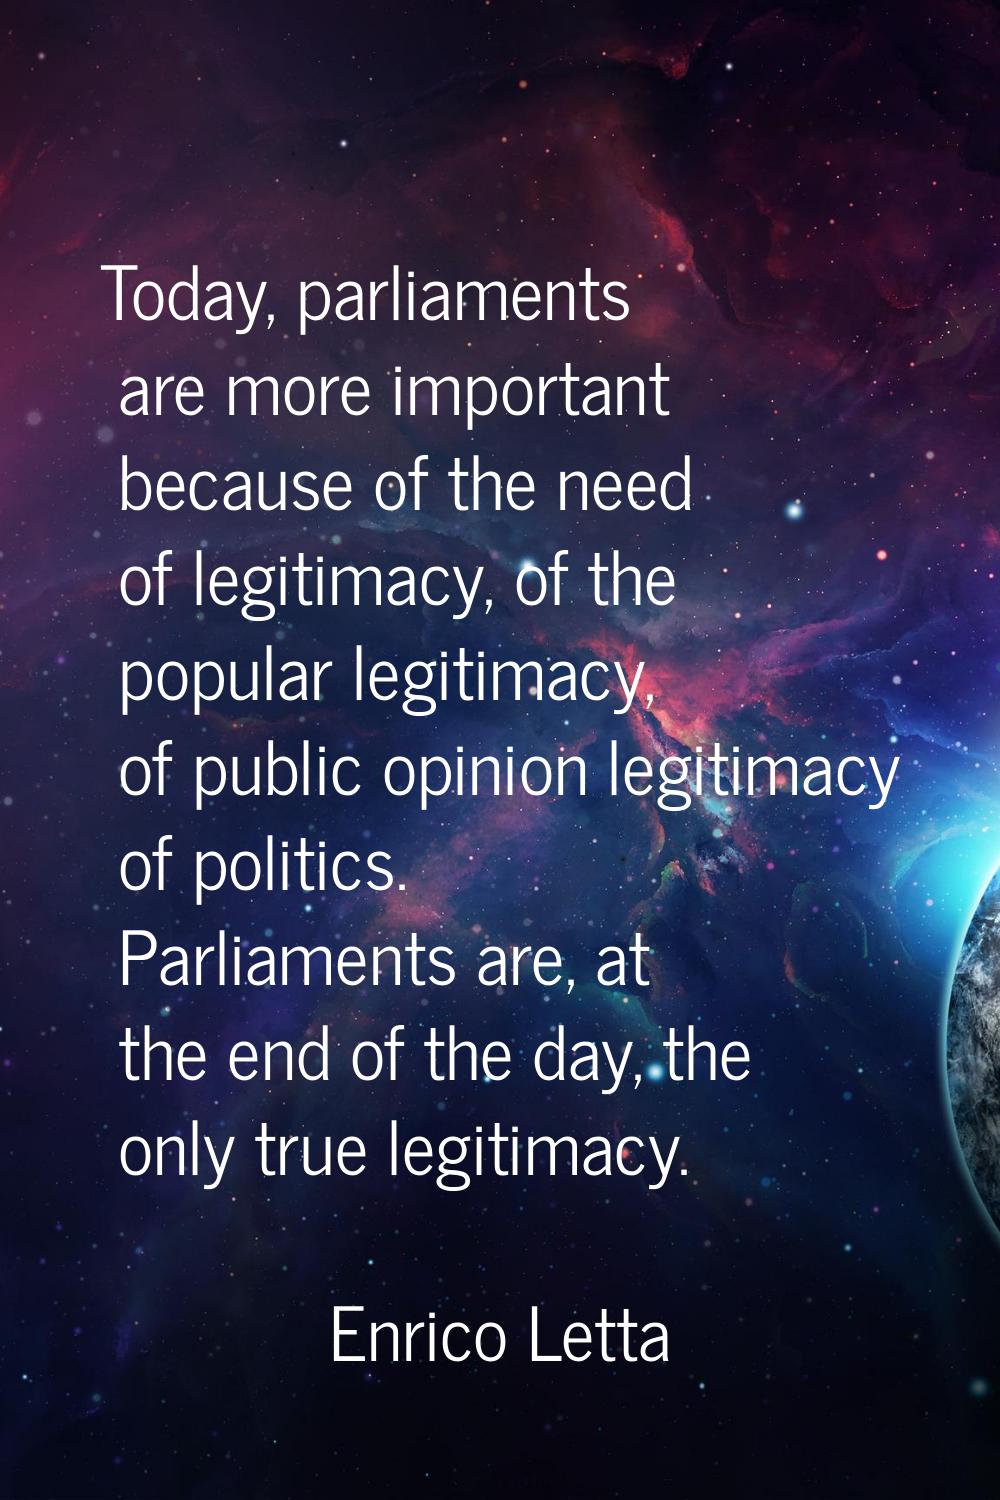 Today, parliaments are more important because of the need of legitimacy, of the popular legitimacy,